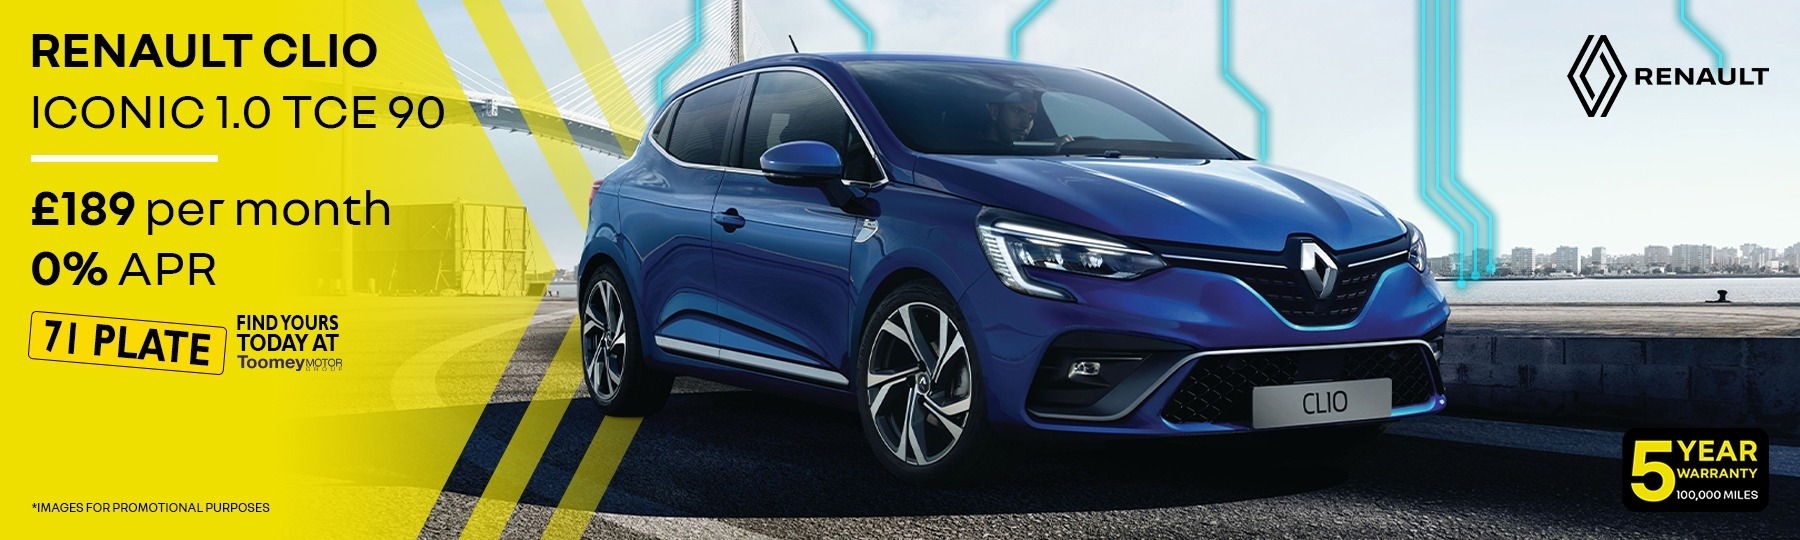 renault Clio New Car Offer